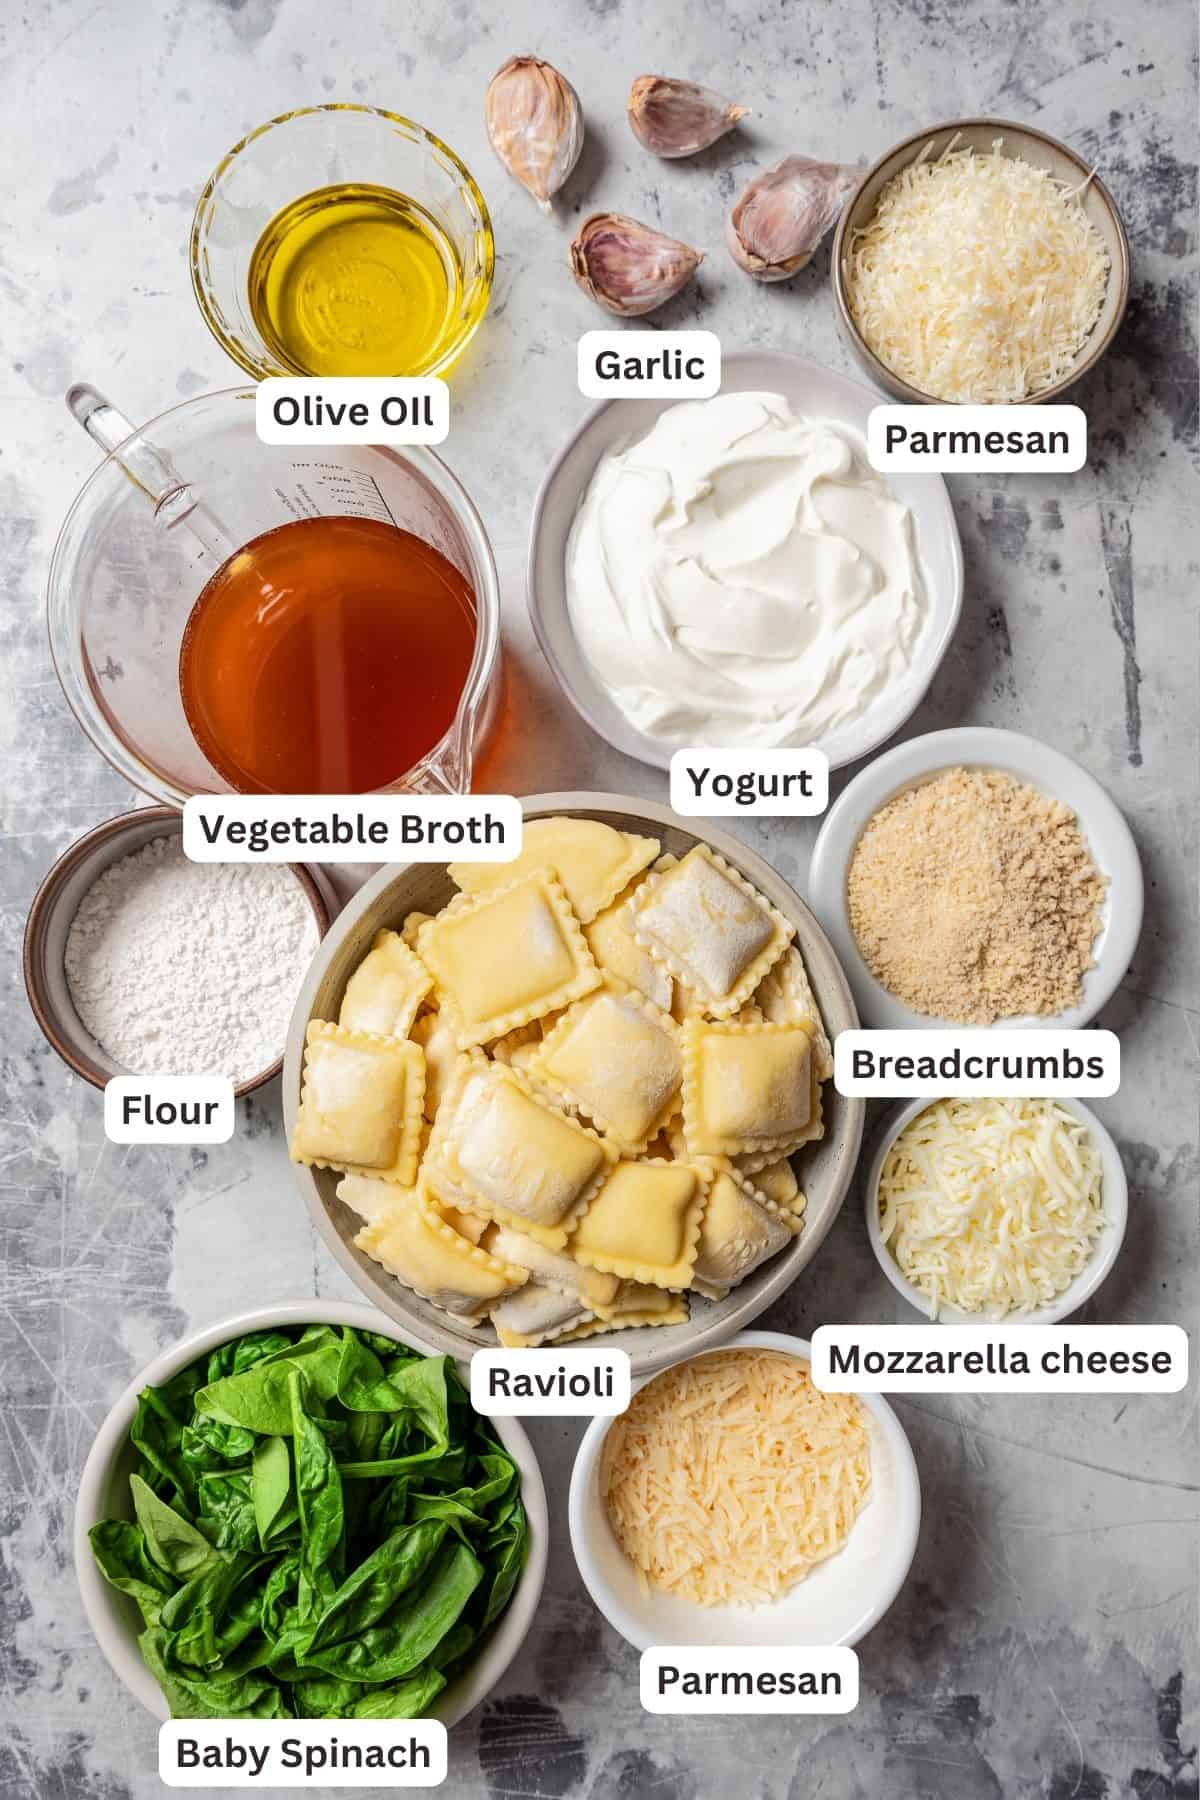 Ingredients for ravioli lasagna with text labels overlaying each ingredient.